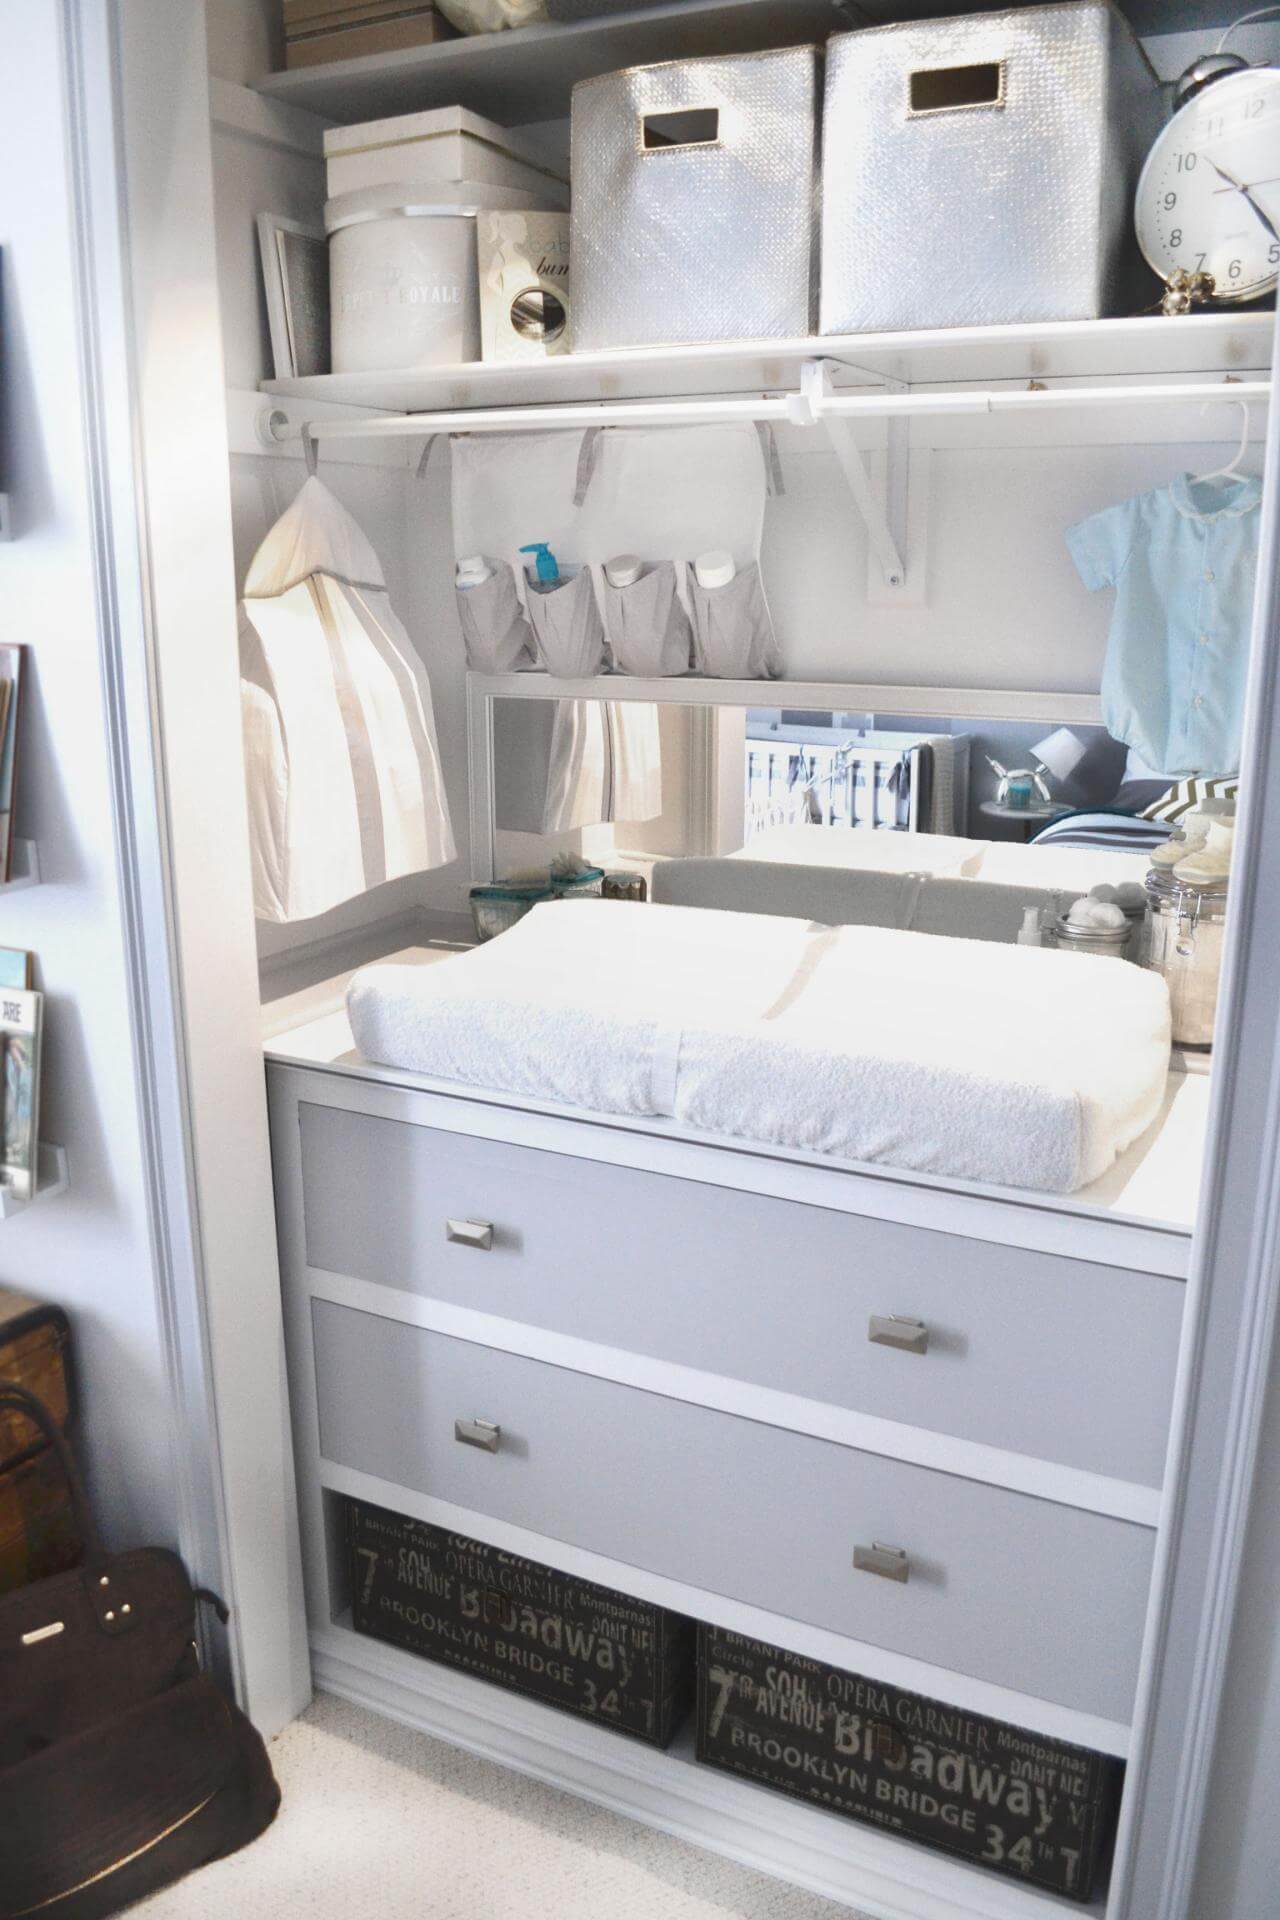 10. A changing table in a closet